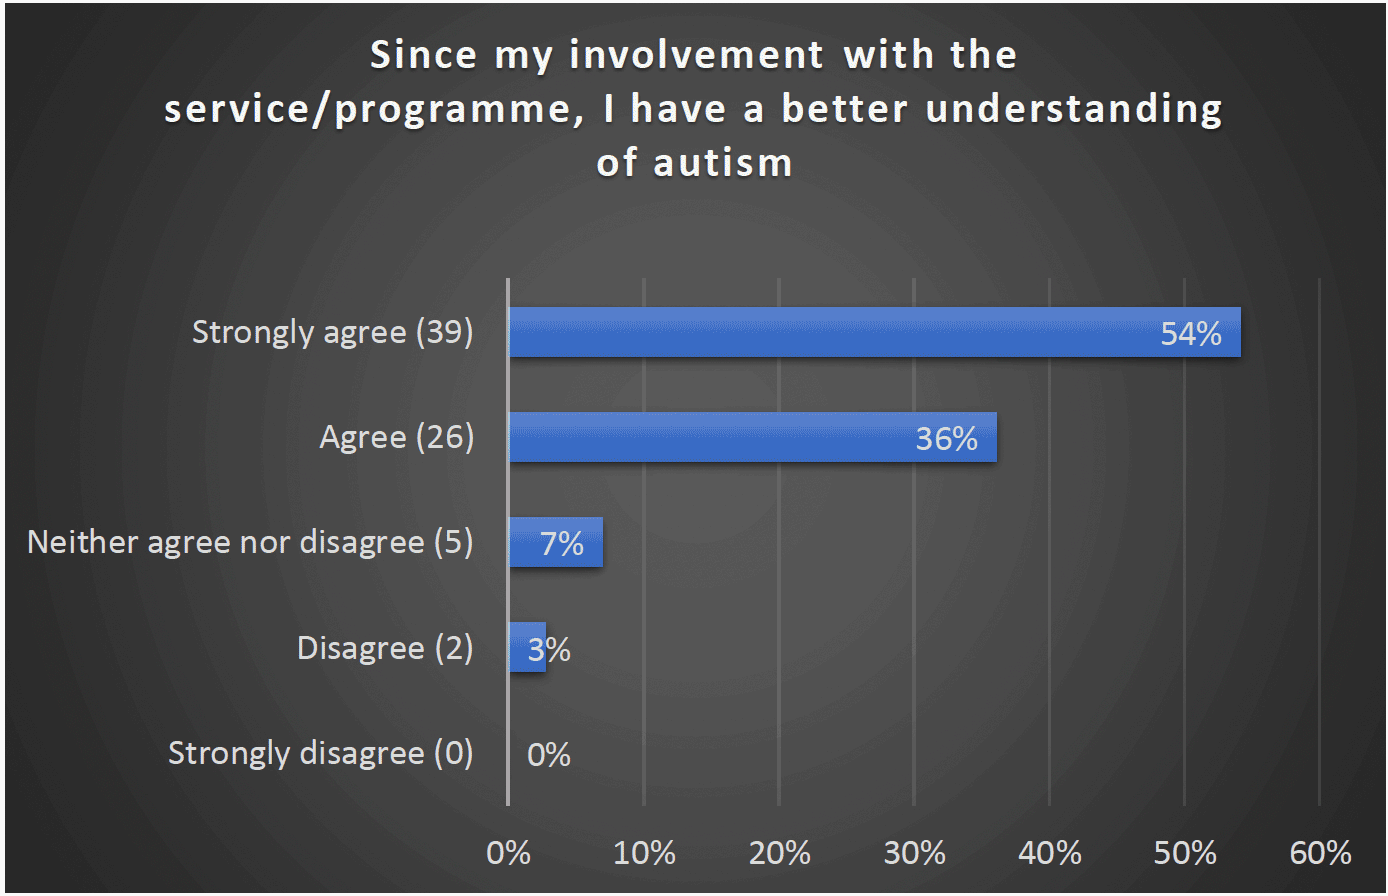 Since my involvement with the service/programme, I have a better understanding of autism - Strongly agree (39) 54%, Agree (26) 36%, Neither agree nor disagree (5) 7%, Disagree (2) 3%, Strongly disagree 0